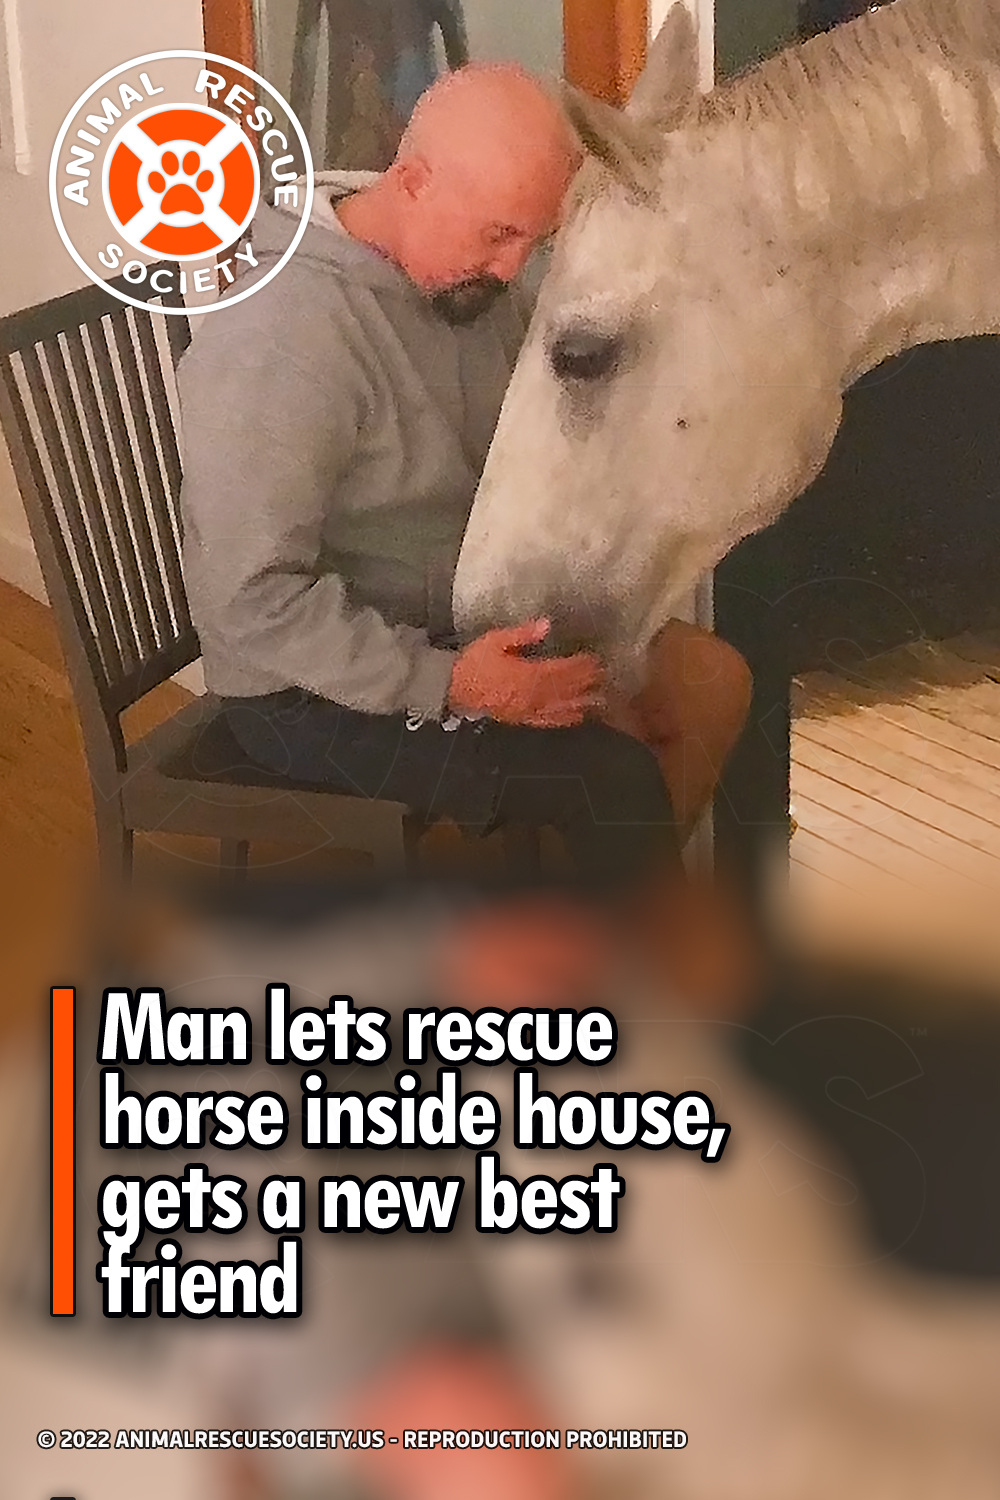 Man lets rescue horse inside house, gets a new best friend